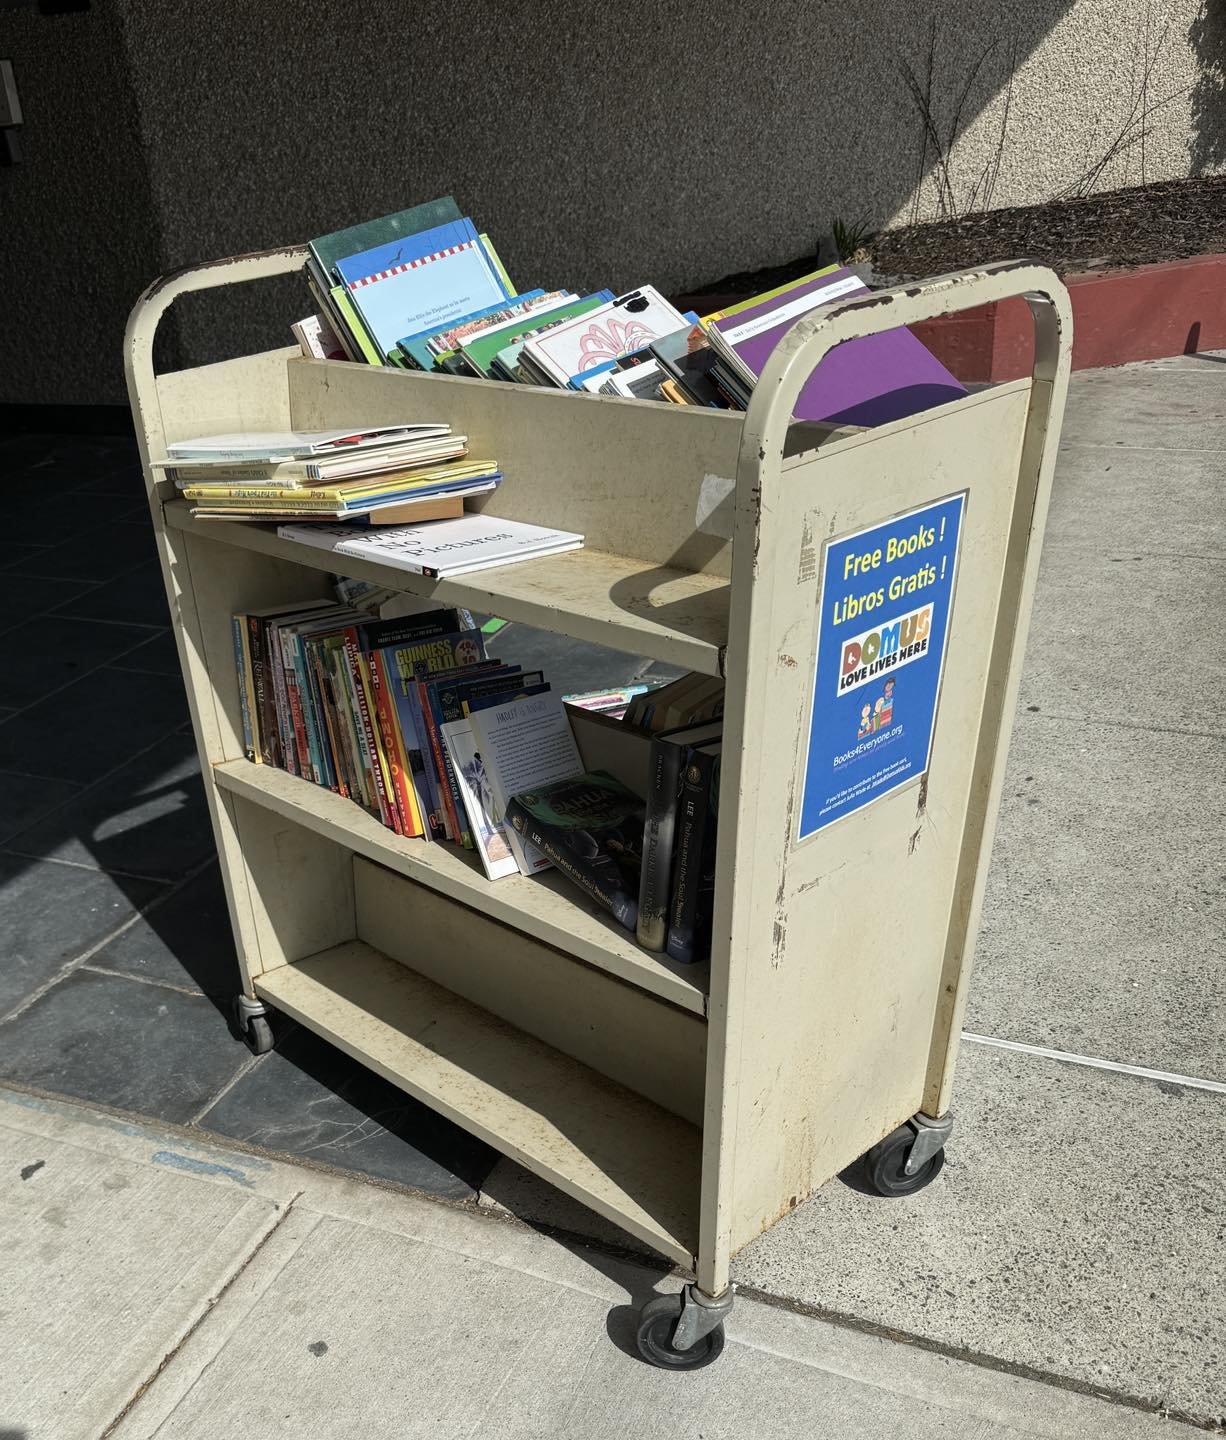 Nothing is better than a ransacked cart of kids books at Domus!